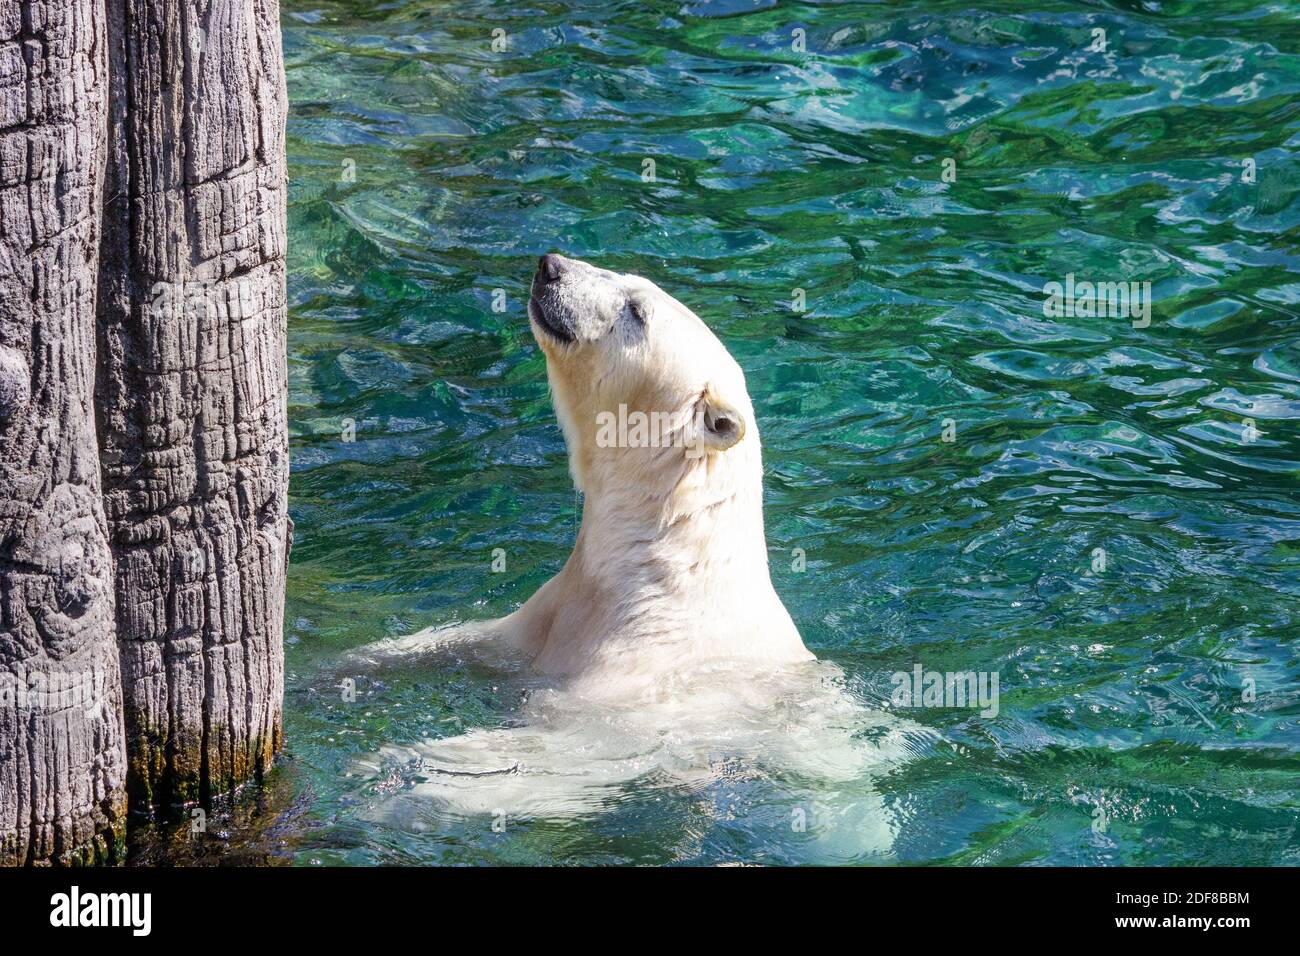 Image of a polar bear looking up from the water on a wall Stock Photo